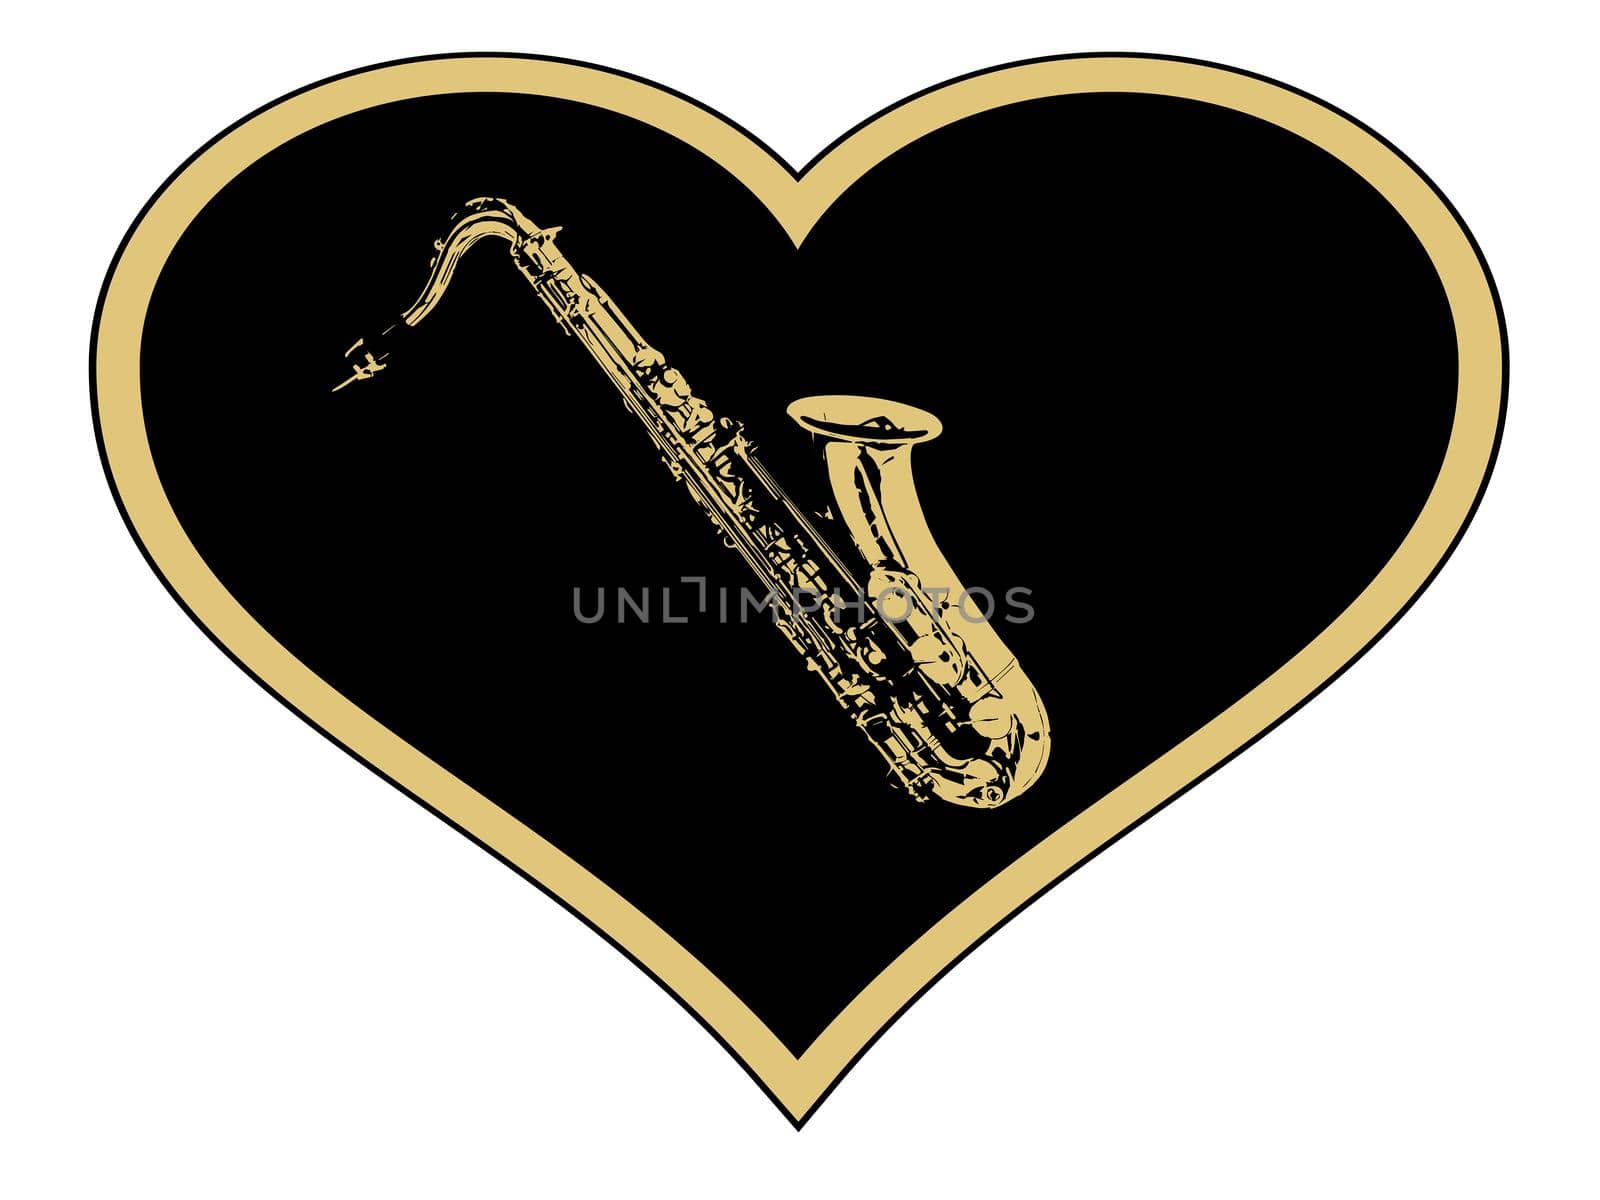 A musical Saxophone in gold on black inset into a isolated gold heart